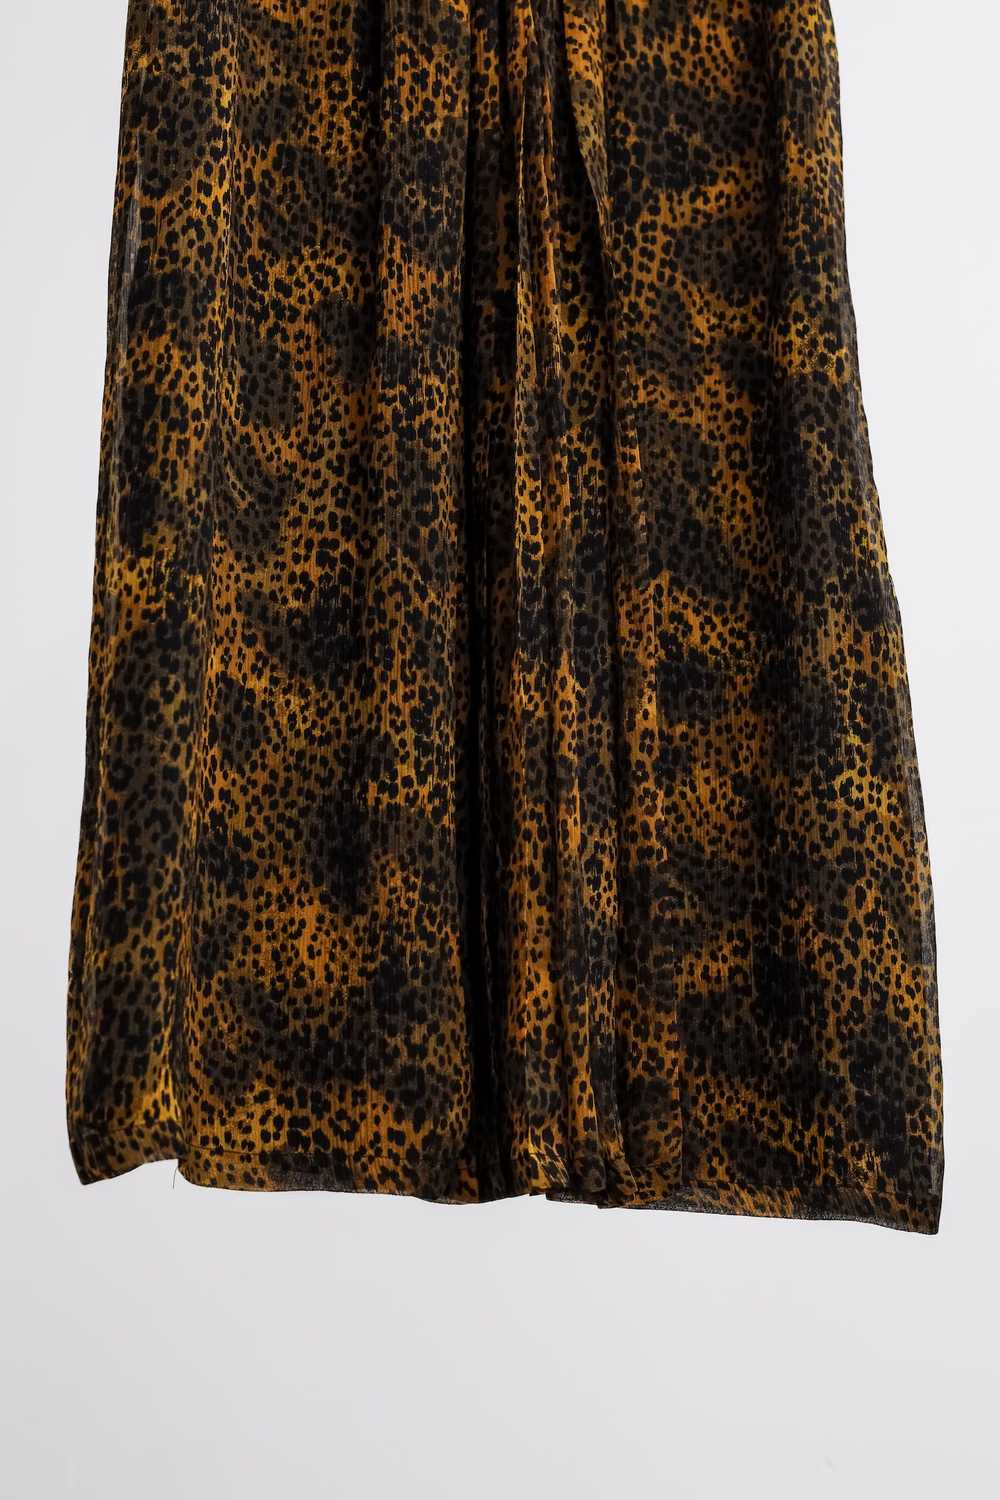 Burberry Burberry Brit Silk Cheetah Print Fit and… - image 6